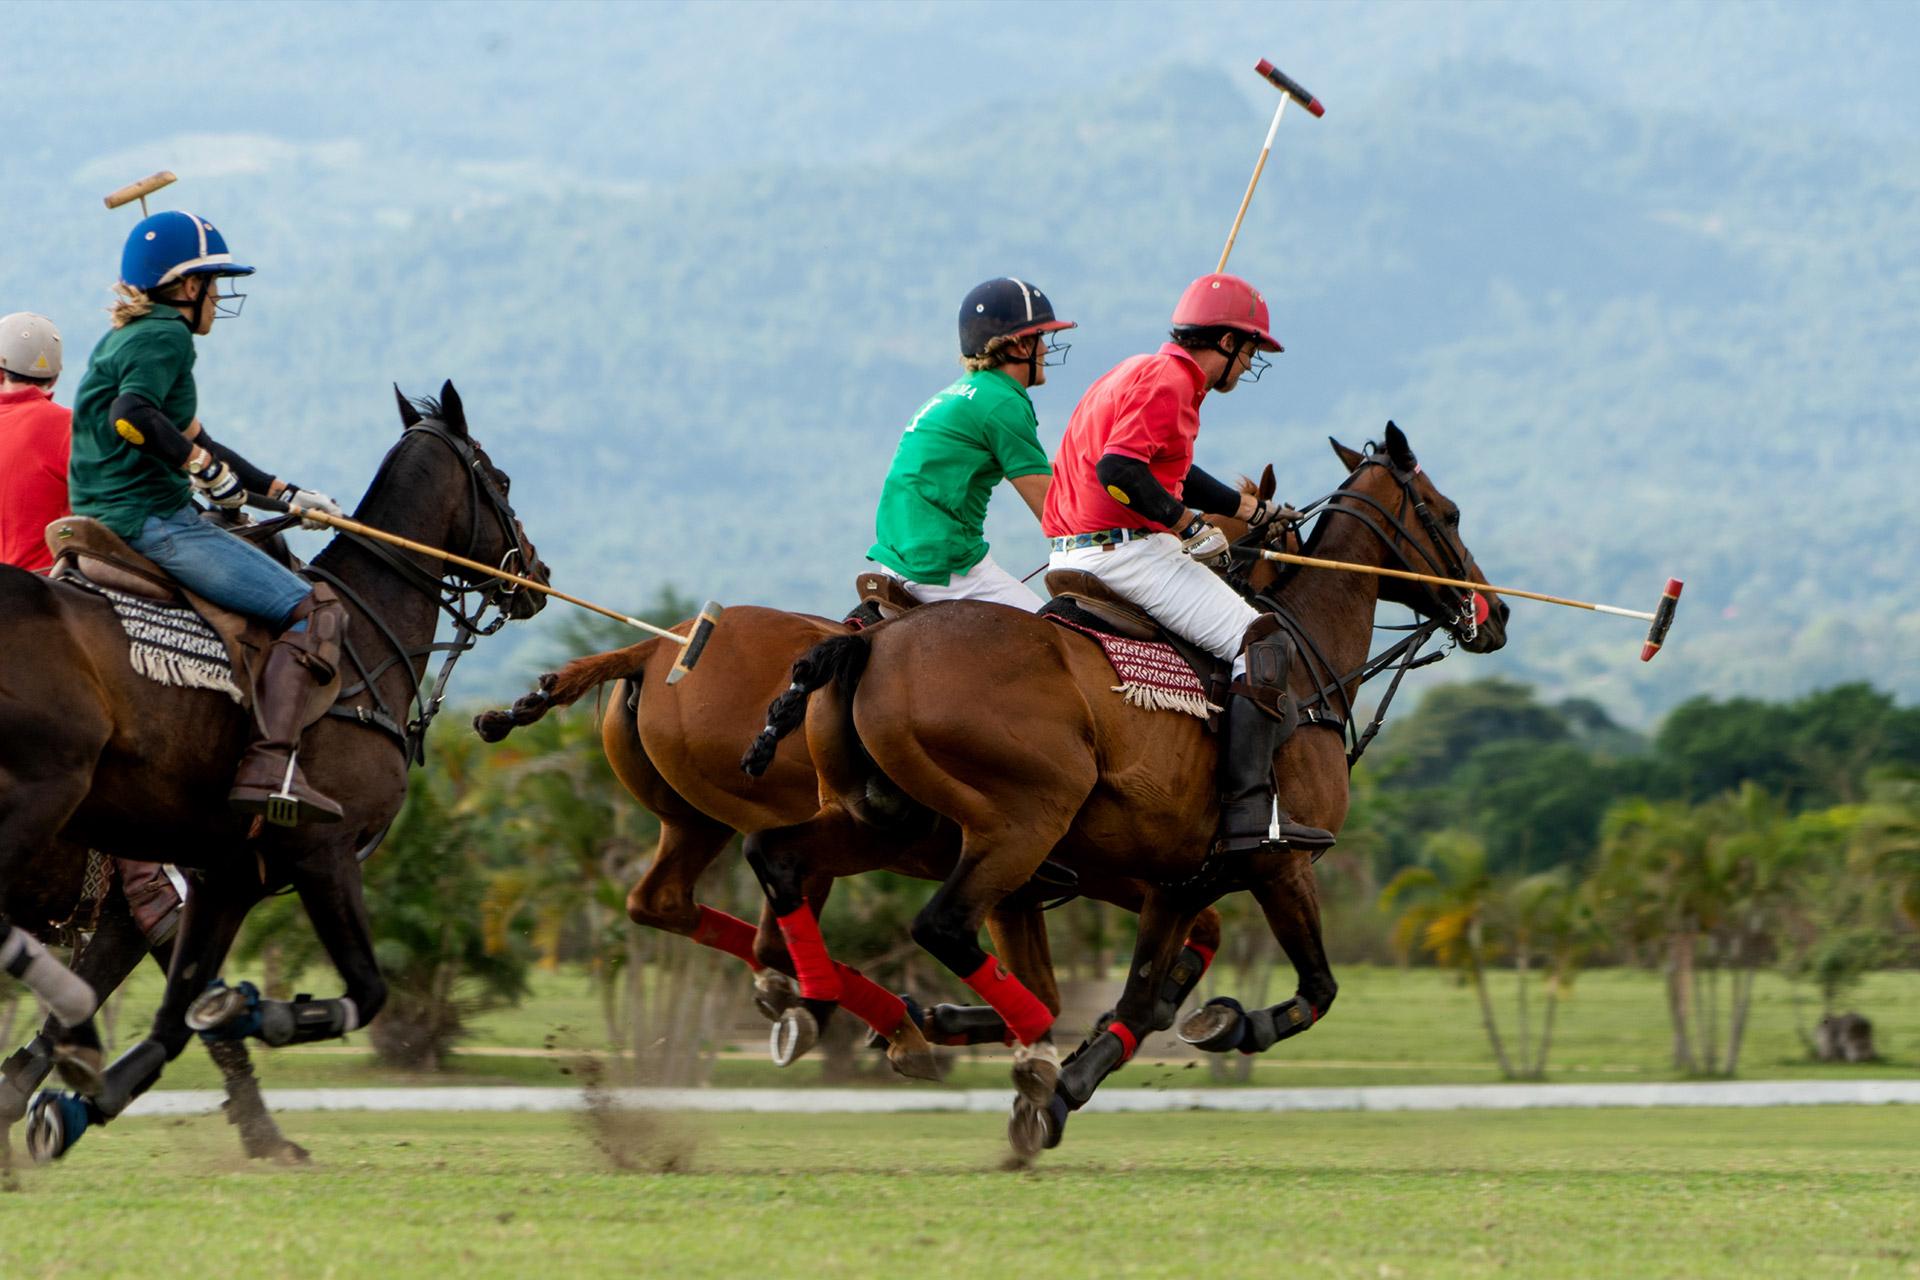 The Nduruma Polo Club is about ten minutes from the Siringit Villa. Polo is played three times per week and a game can be enjoyed from the comfort of the clubhouse.n